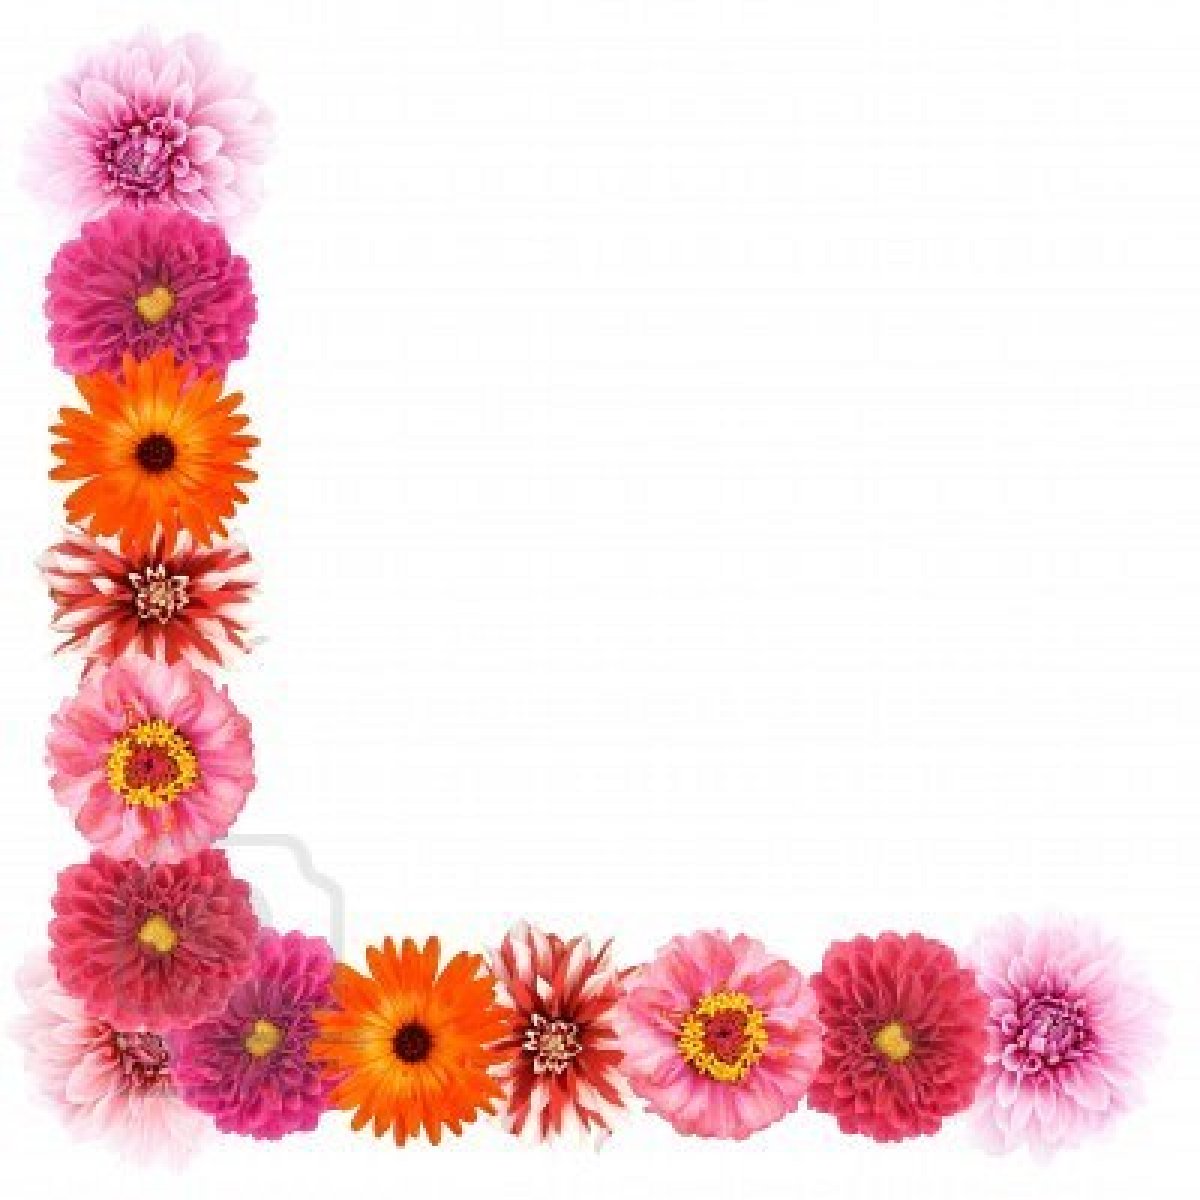 Flower Page Border - Cliparts.co